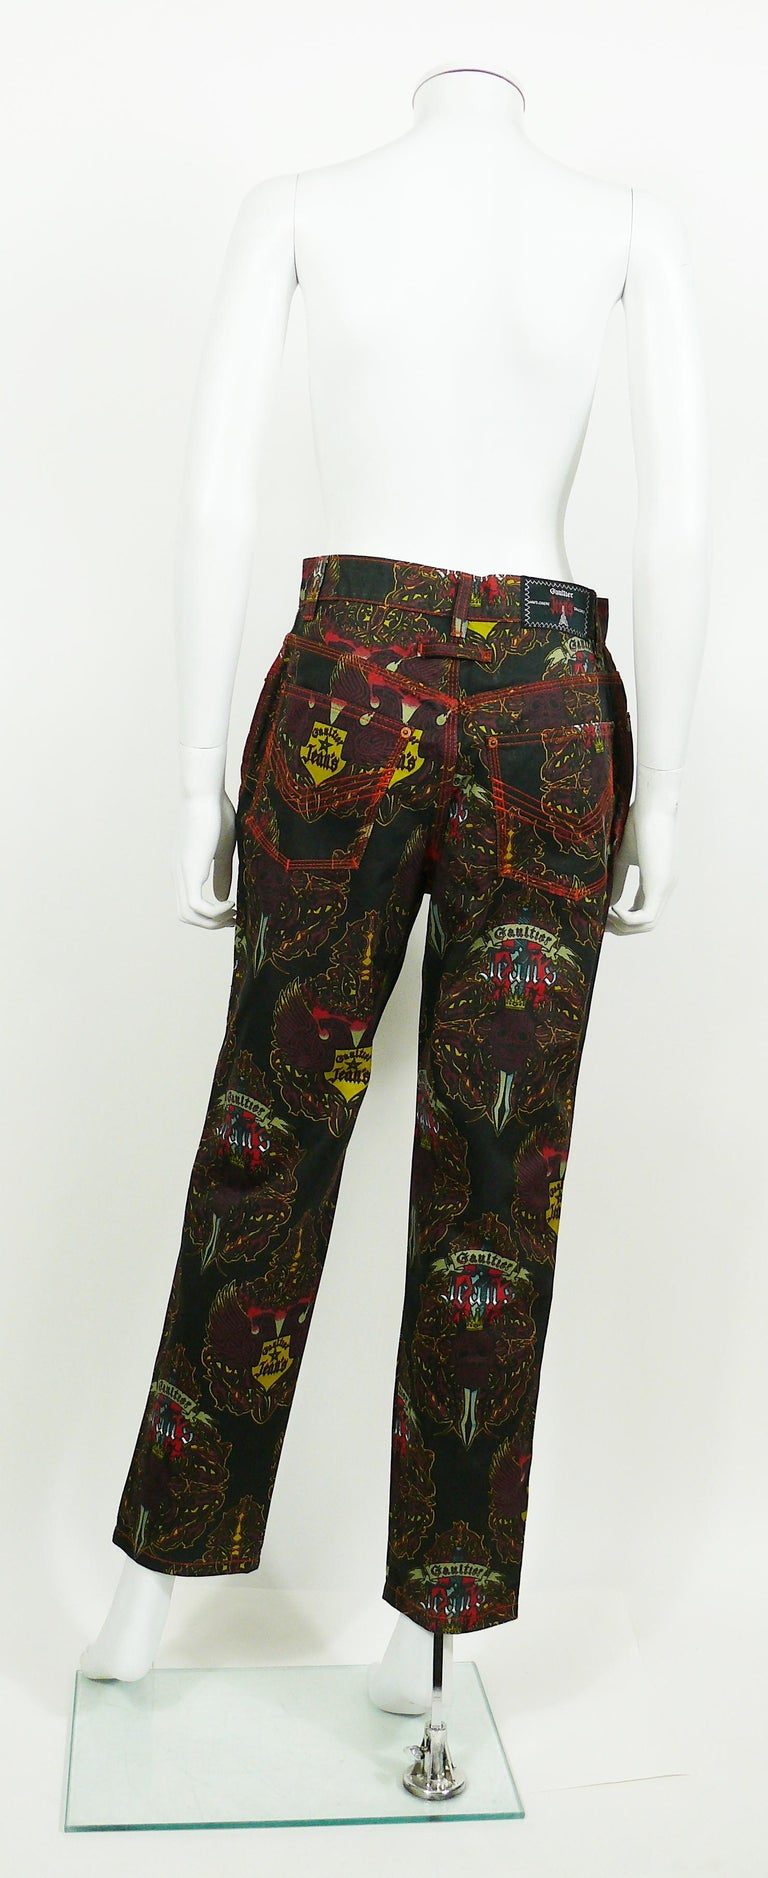 Women's Jean Paul Gaultier Vintage Crowned Skull and Eagle Print Pants Trousers For Sale